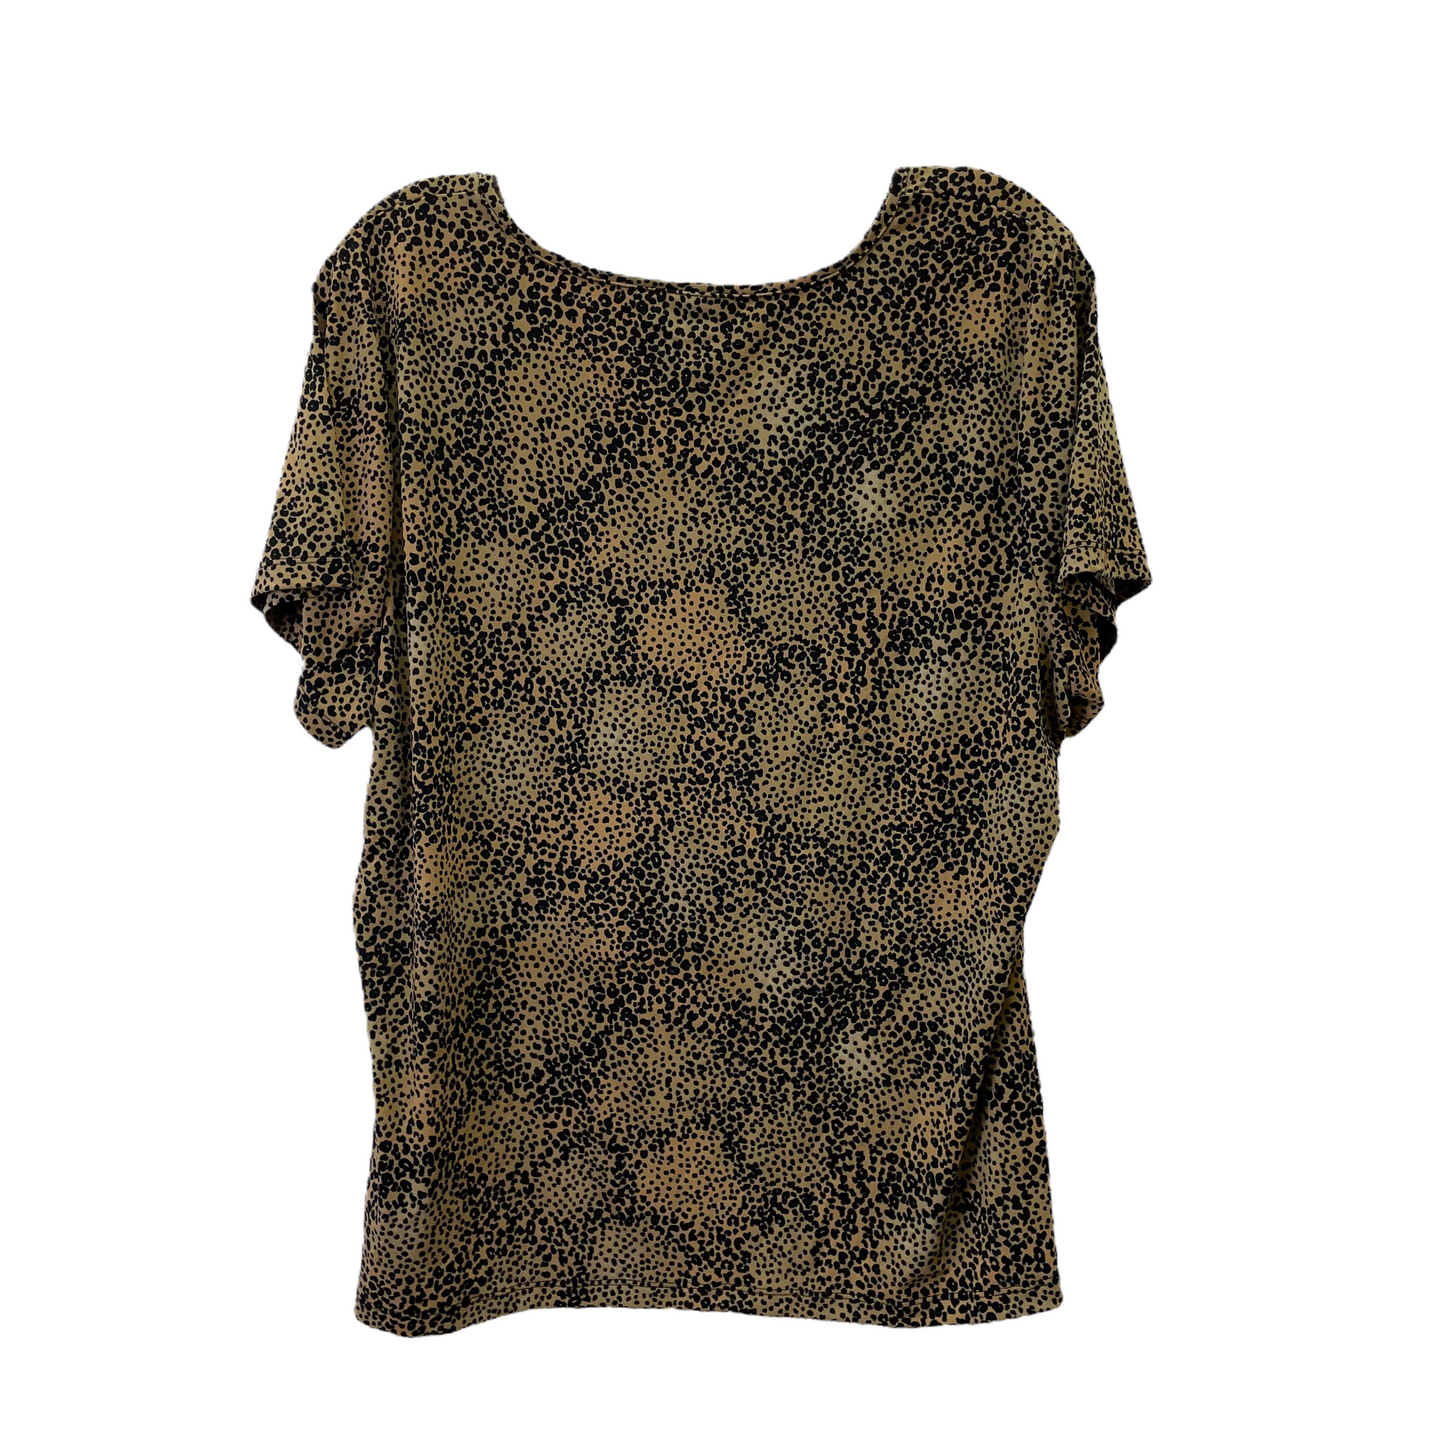 Animal Print Top Short Sleeve By East 5th, Size: 1x